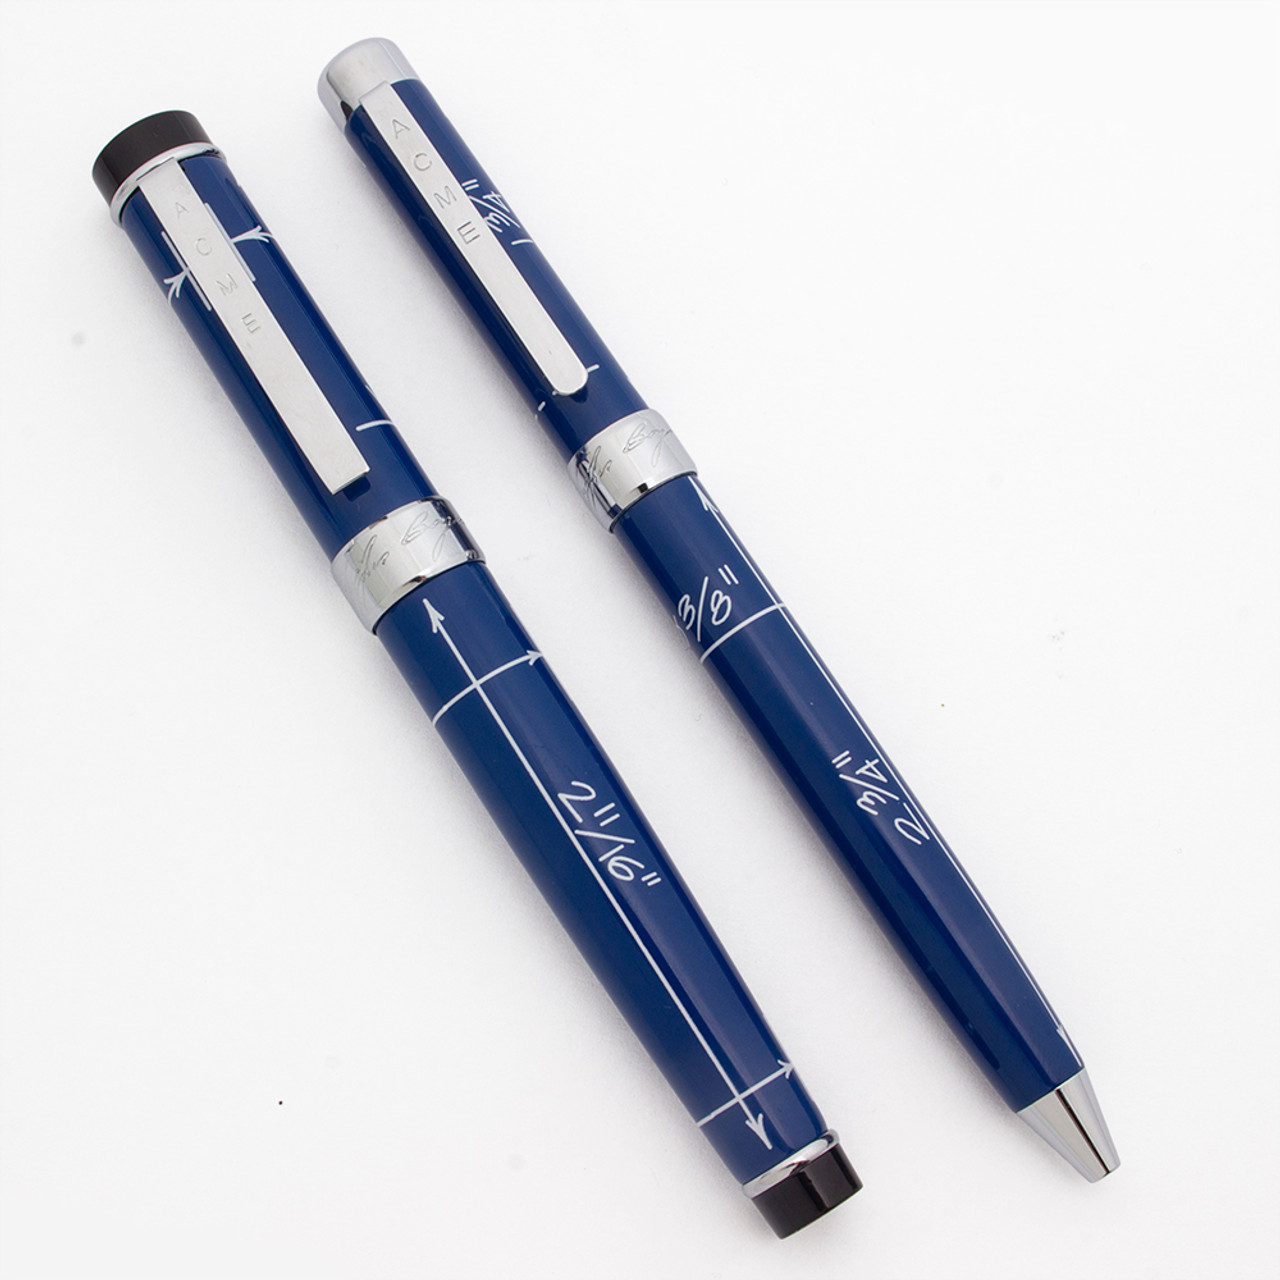 ACME Studios Rollerball and Ballpoint Set (1999 -2011) - BLUEPRINT by Constantin Boym, Blue with Chrome Trim (Excellent +, Works Well)